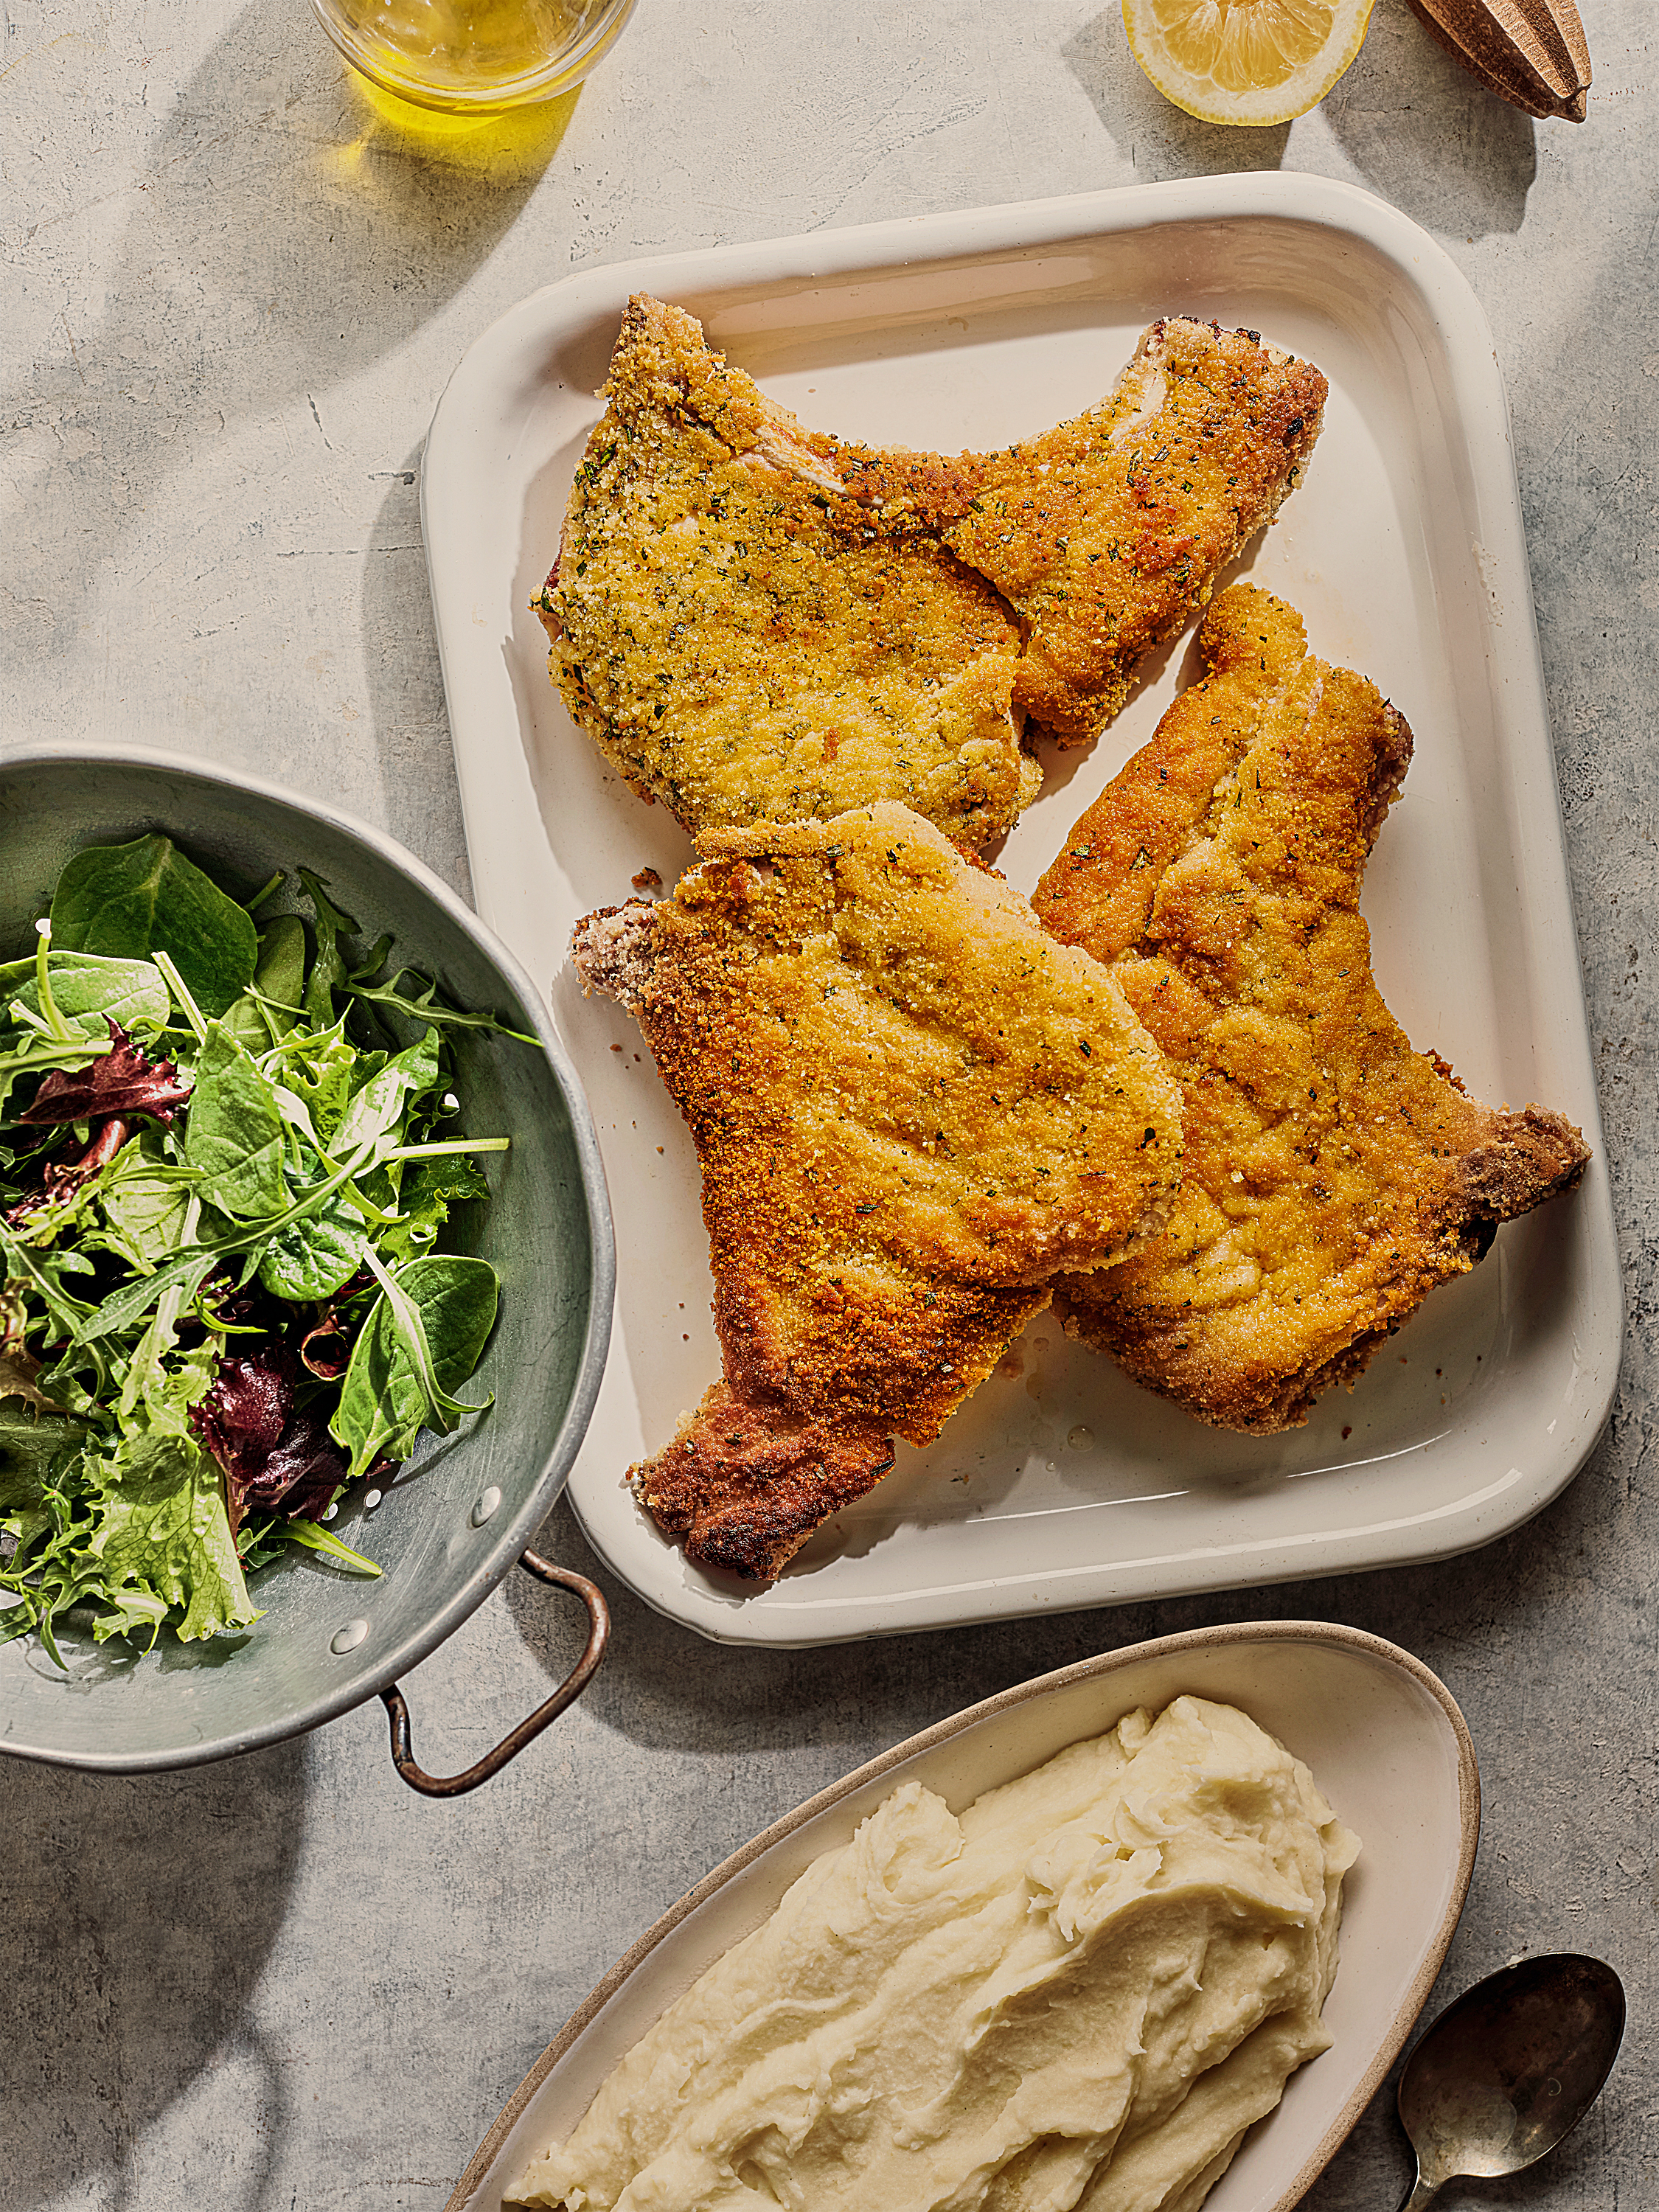 Pork Milanese from Gino's Italian Family Adventure: Easy Recipes the Whole Family will Love by Gino D'Acampo (published by Bloomsbury) (Haarala Hamilton/PA)